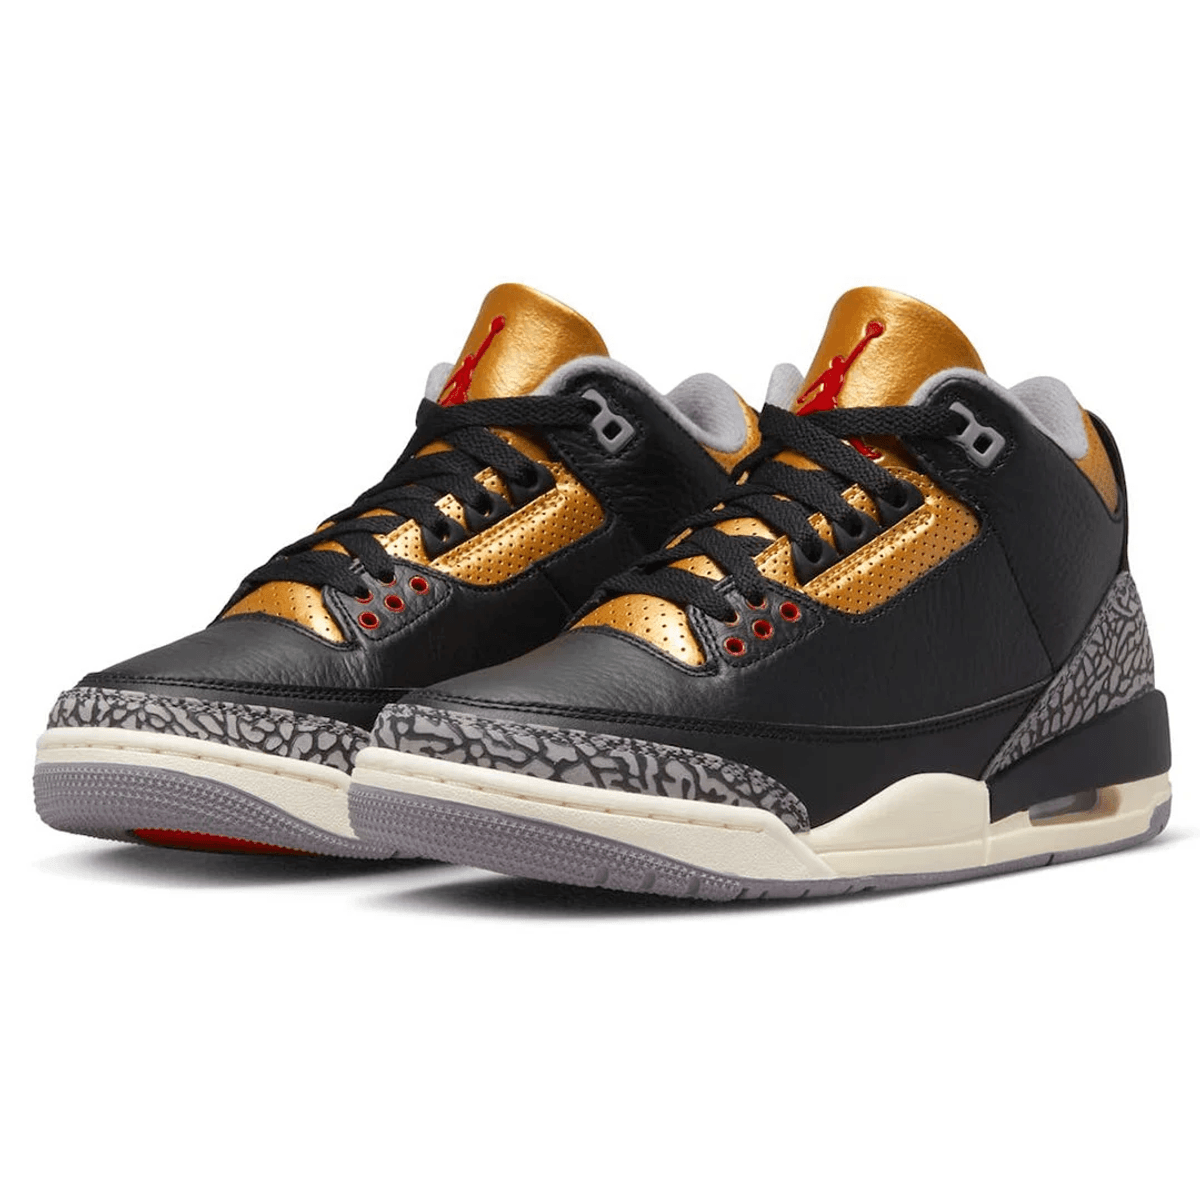 The Air Jordan 3 Gets A Touch Of Gold In The Air Jordan 3 WMNS Black Gold